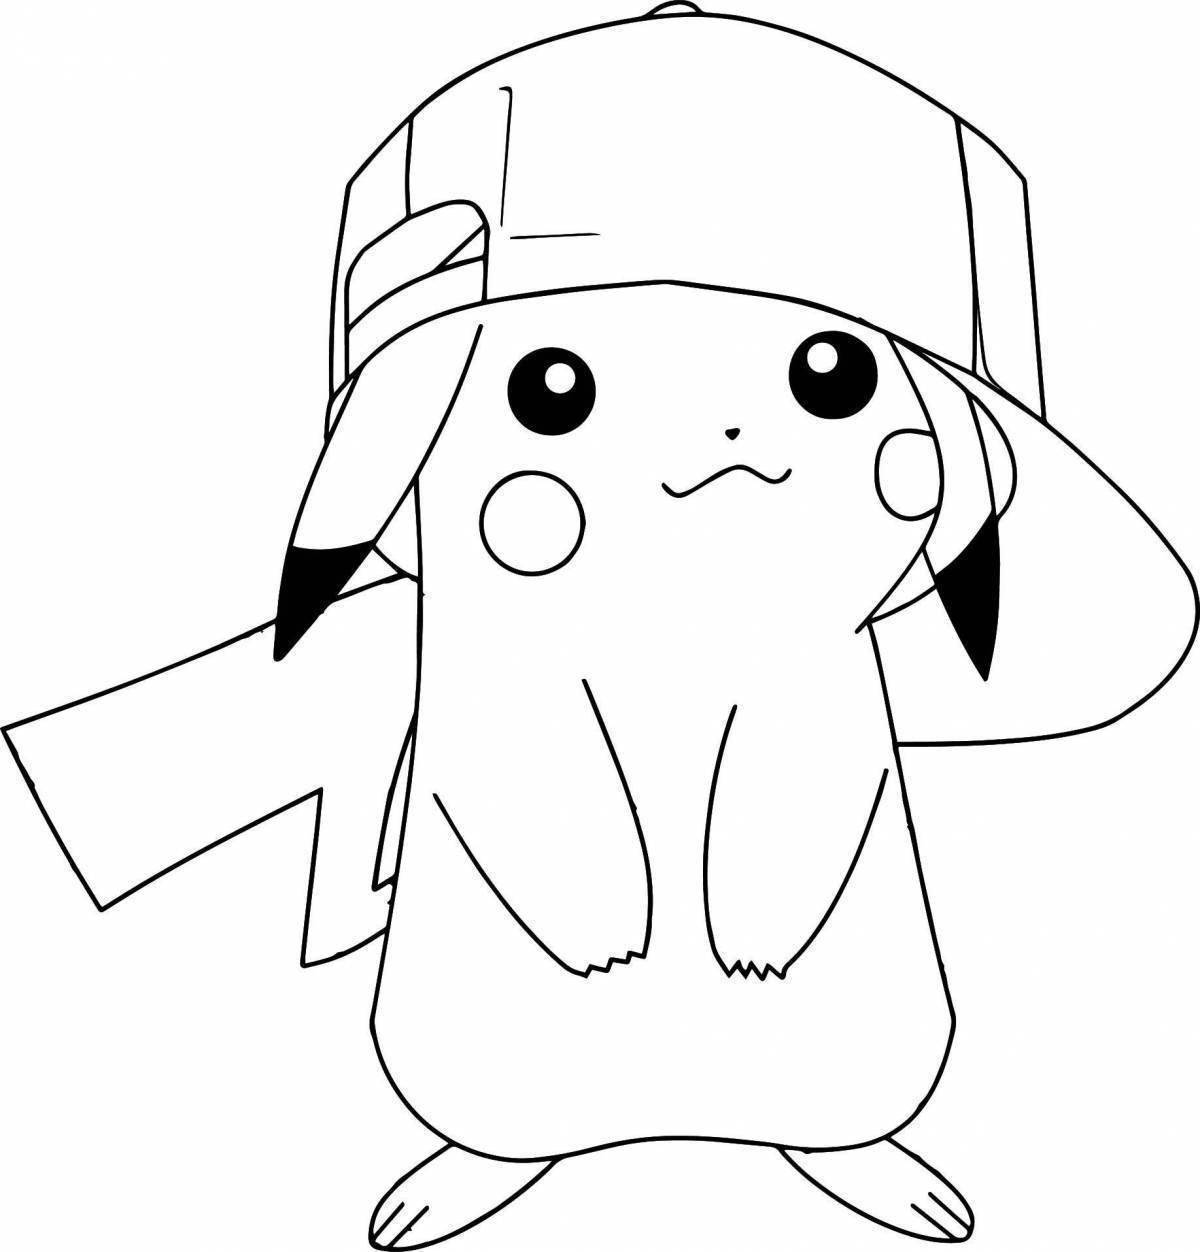 Playful pikachu coloring page for girls